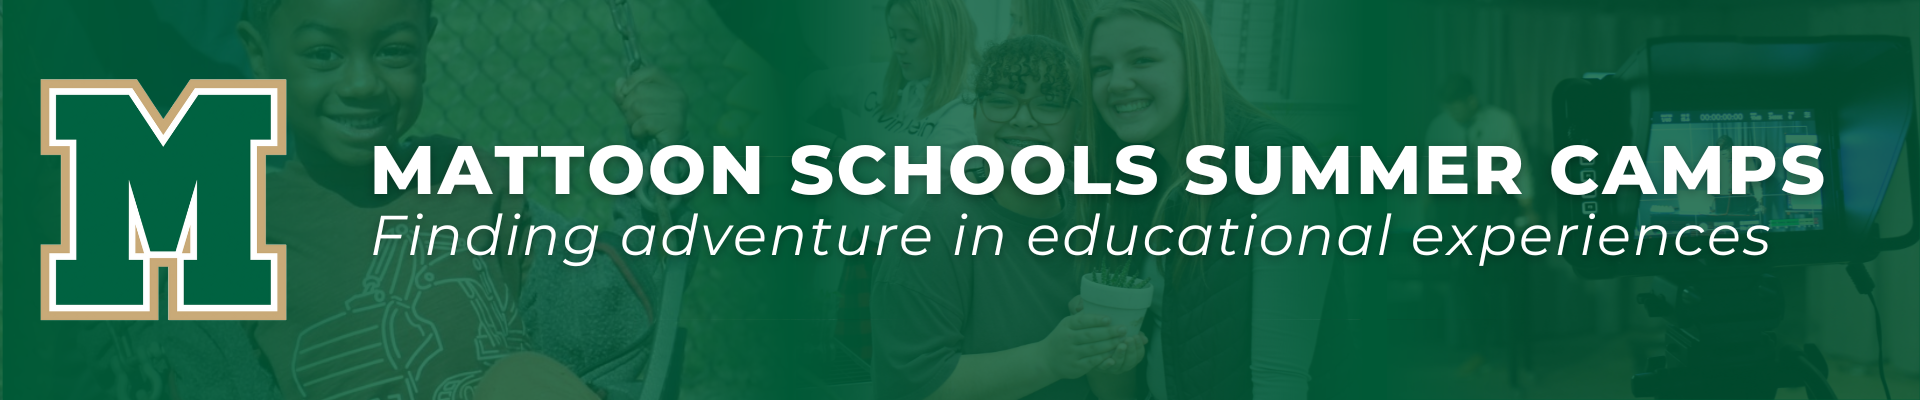 Mattoon Schools Summer Camp: Finding adventure in educational experiences